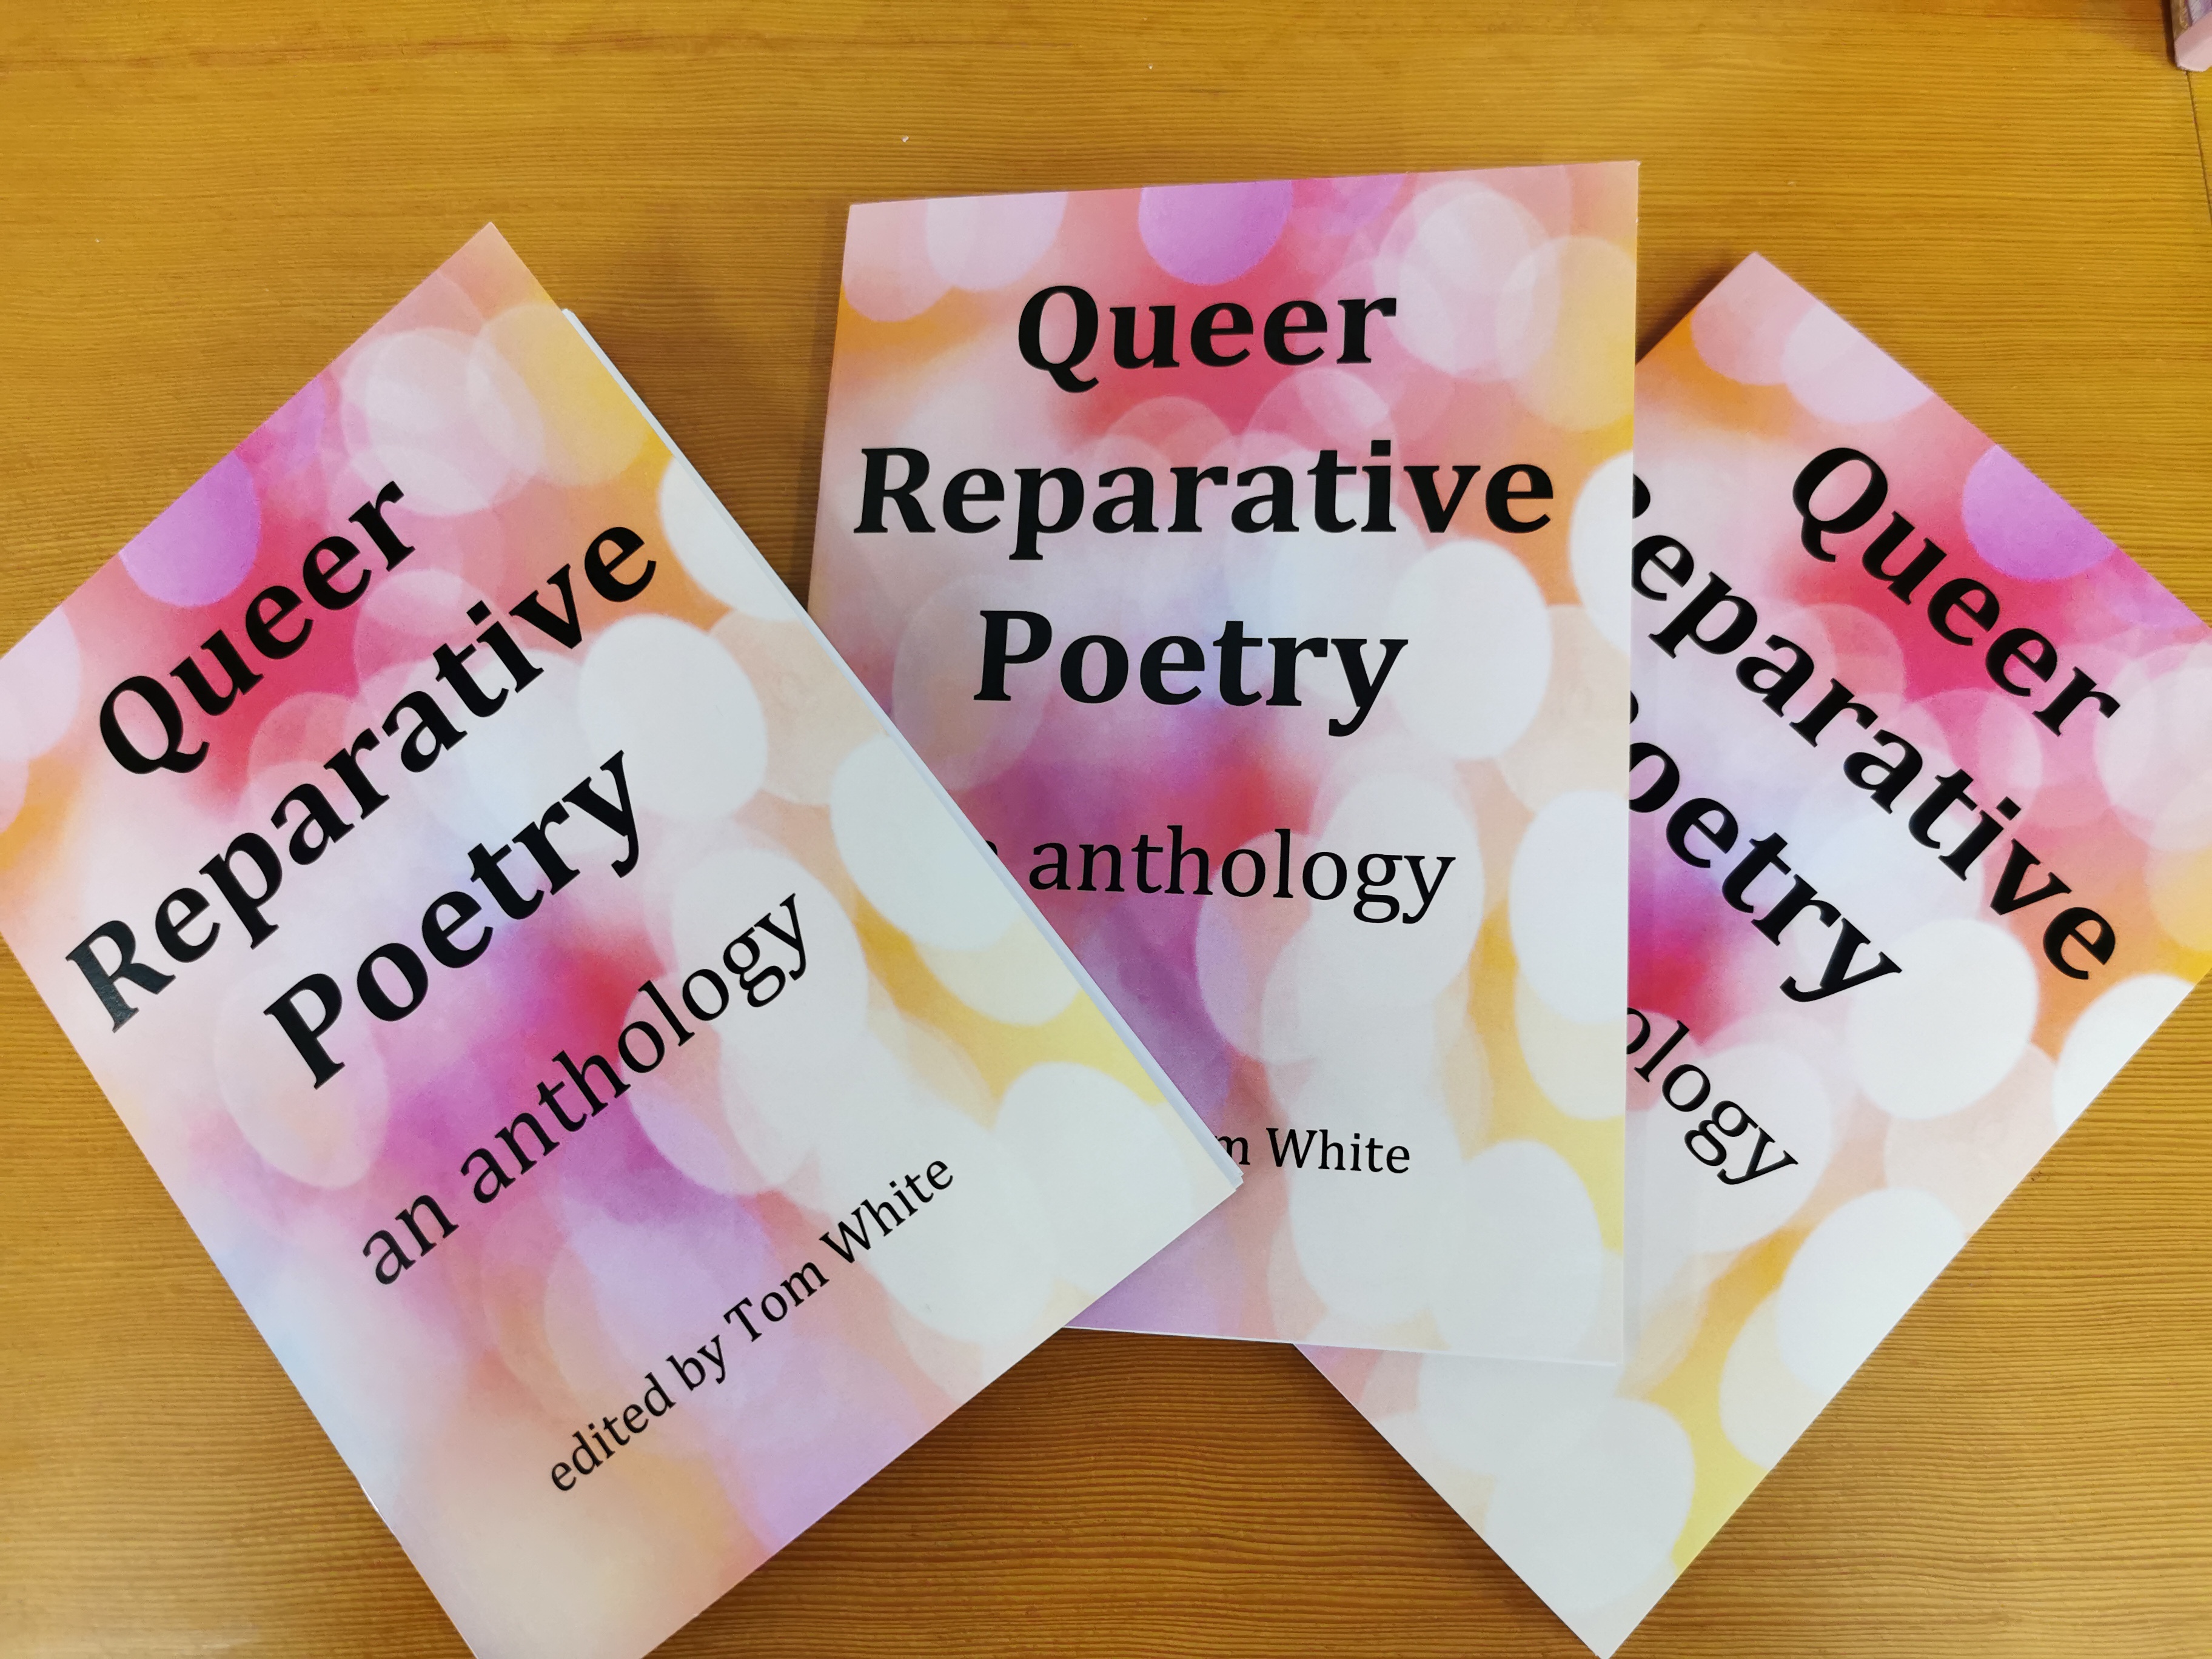 Alt text: Photo shows three copies of Queer Reparative Poetry fanned across a desk